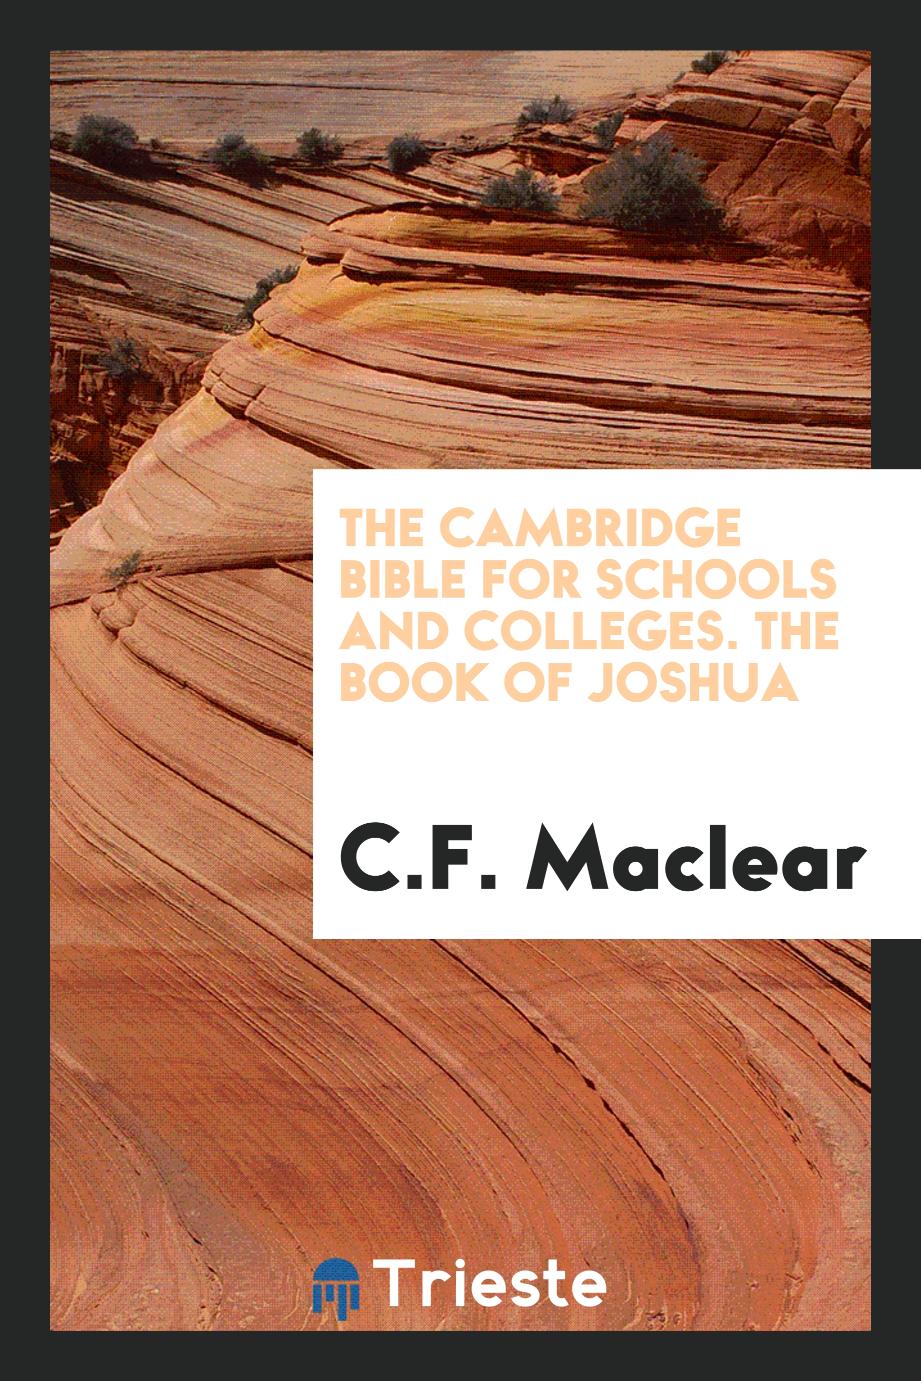 The Cambridge Bible for schools and colleges. The book of Joshua